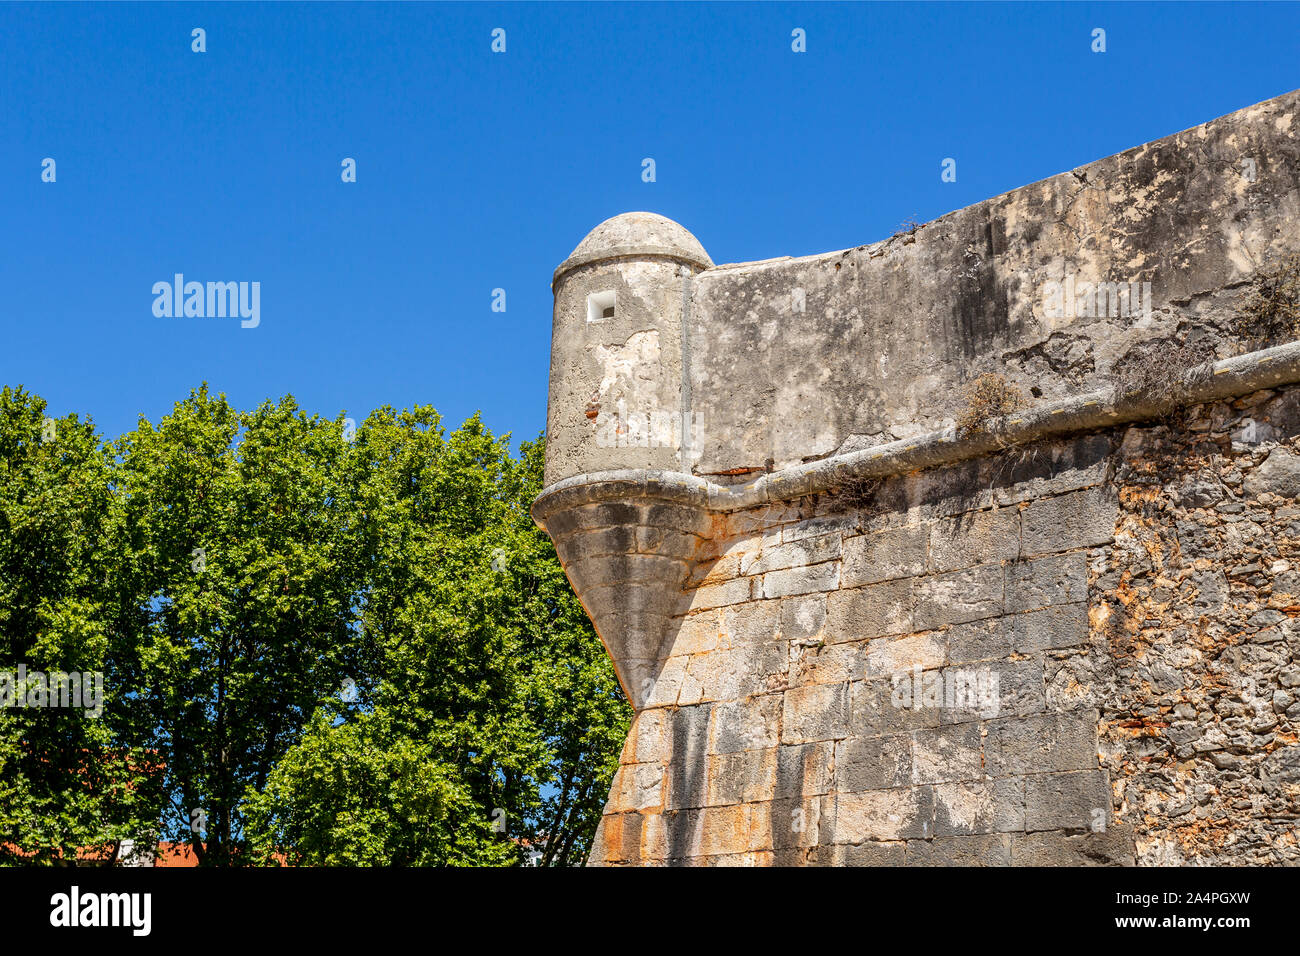 Detail of the old rampart wall and watchtower of the 16th century Citadel of Cascais Portugal Stock Photo